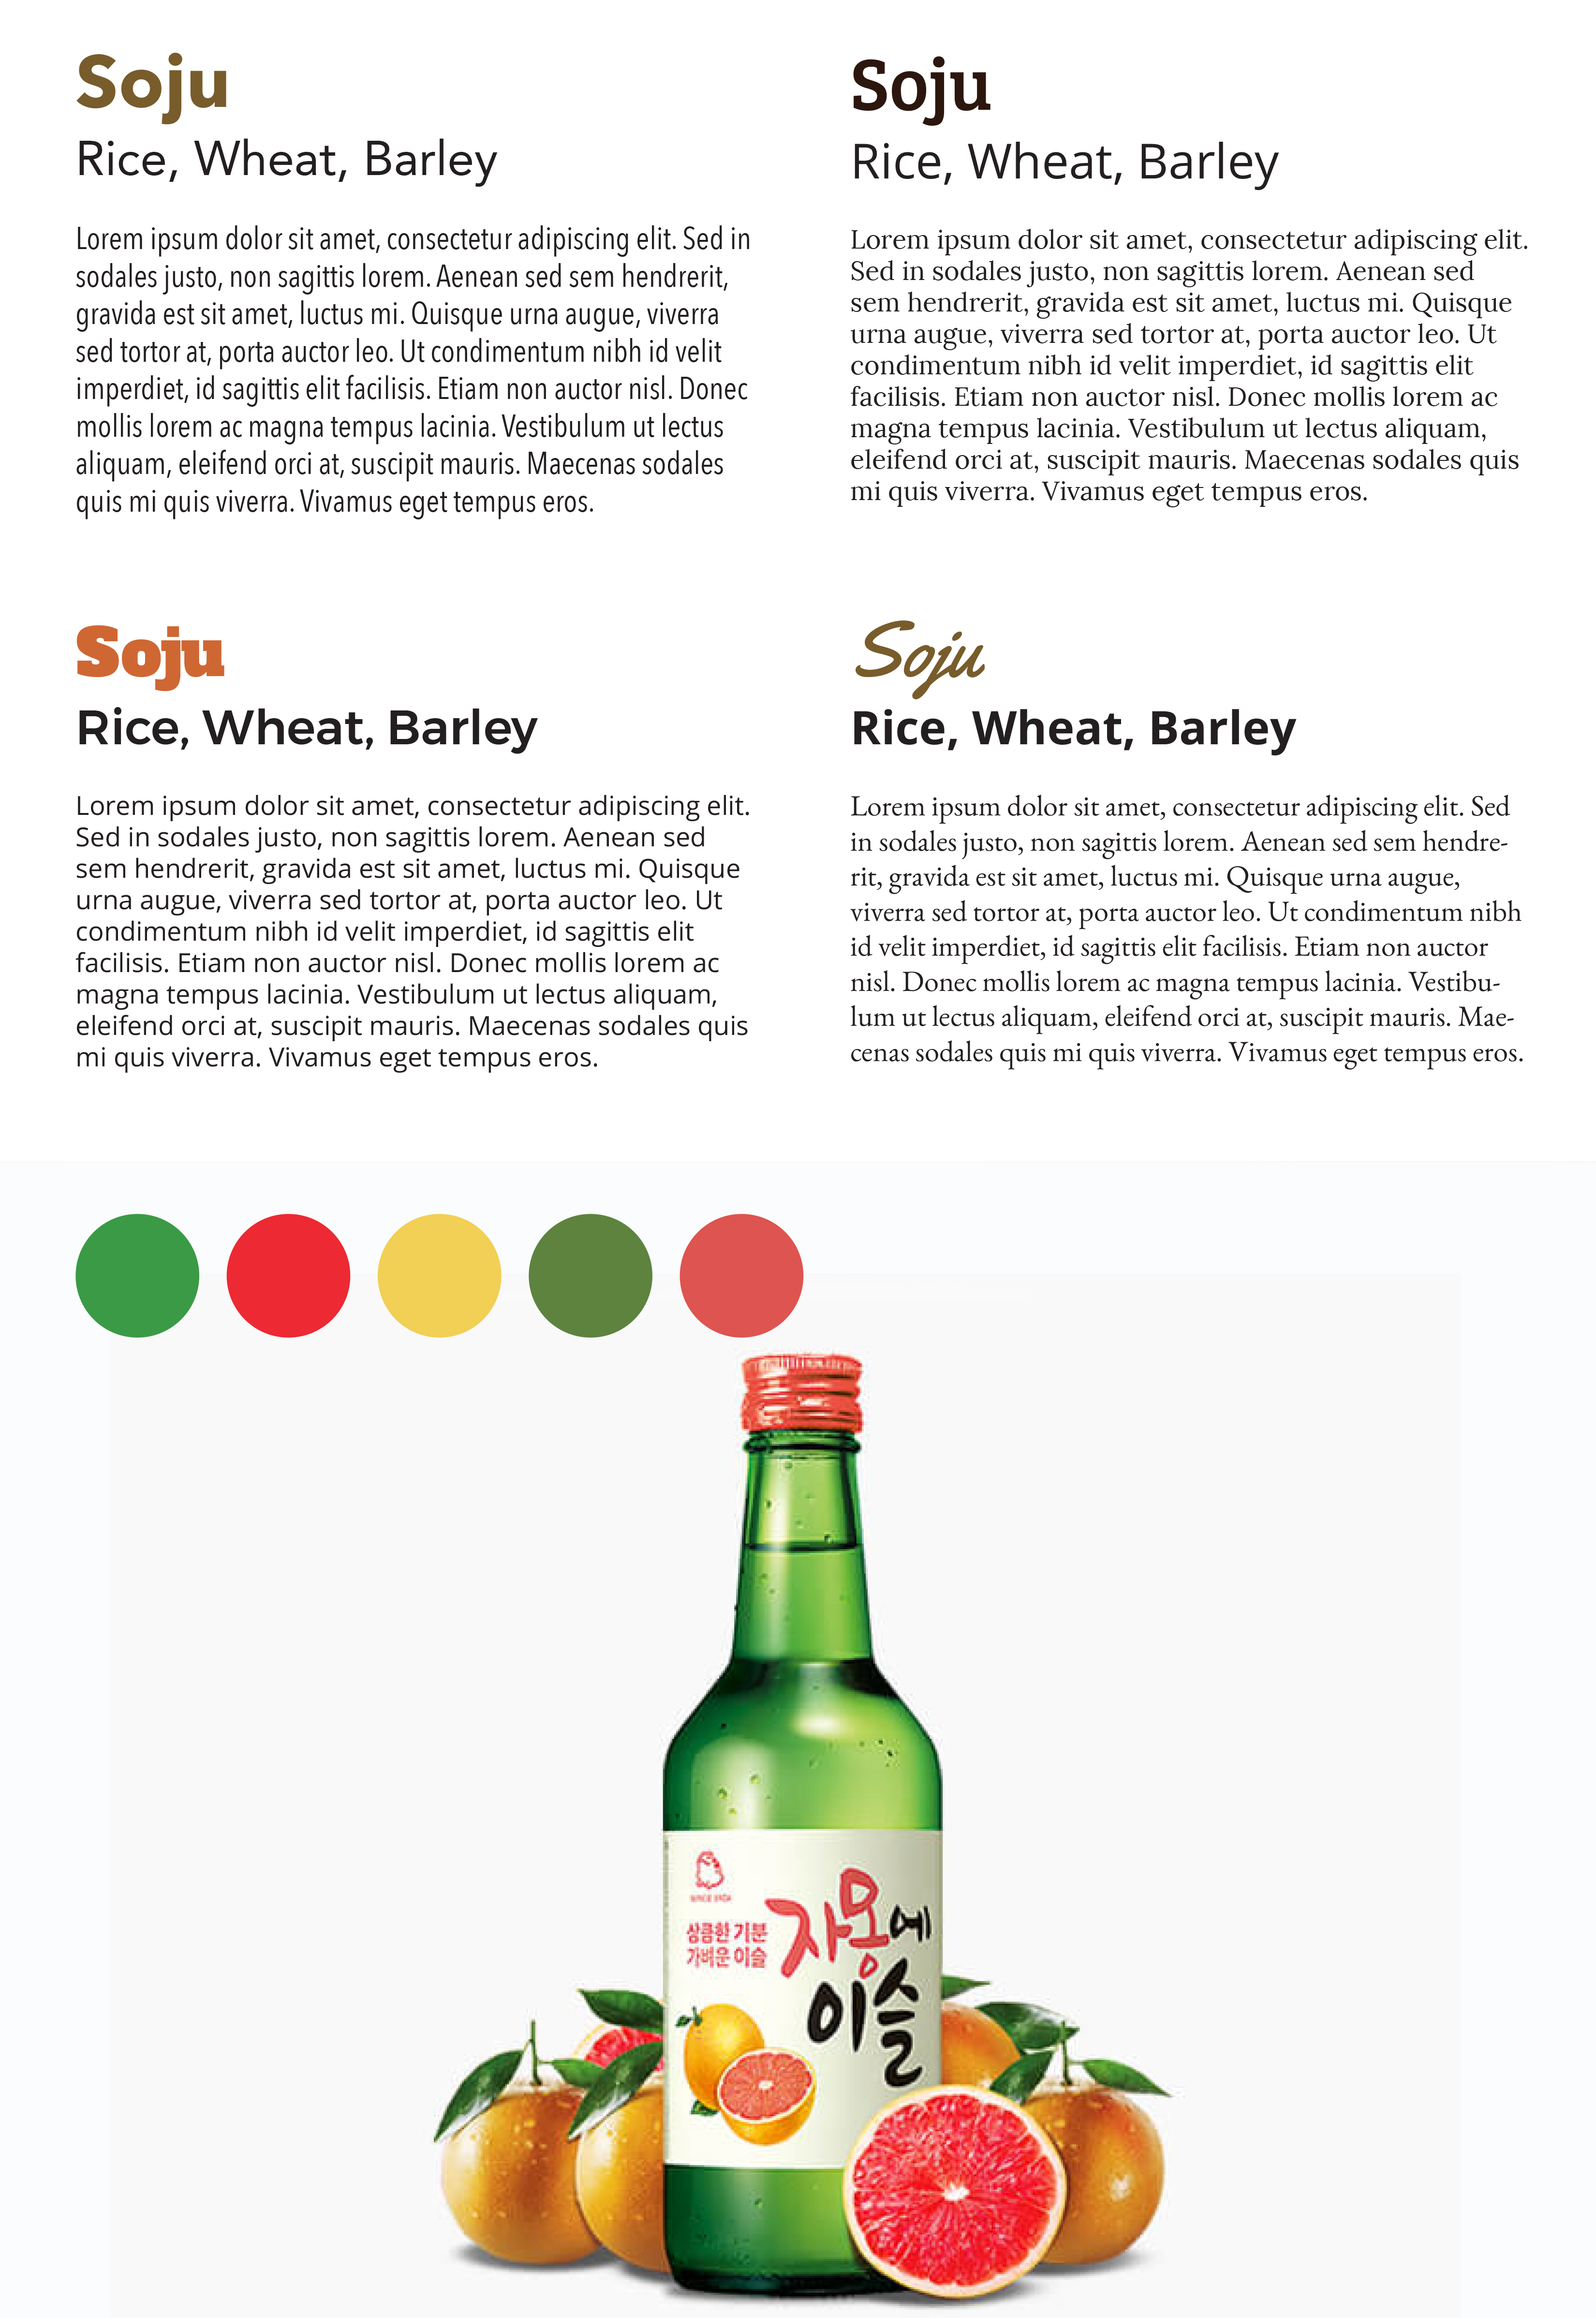 A mock-up of typefaces and colors to be used in an ad for a beverage. Image links to full-size image.